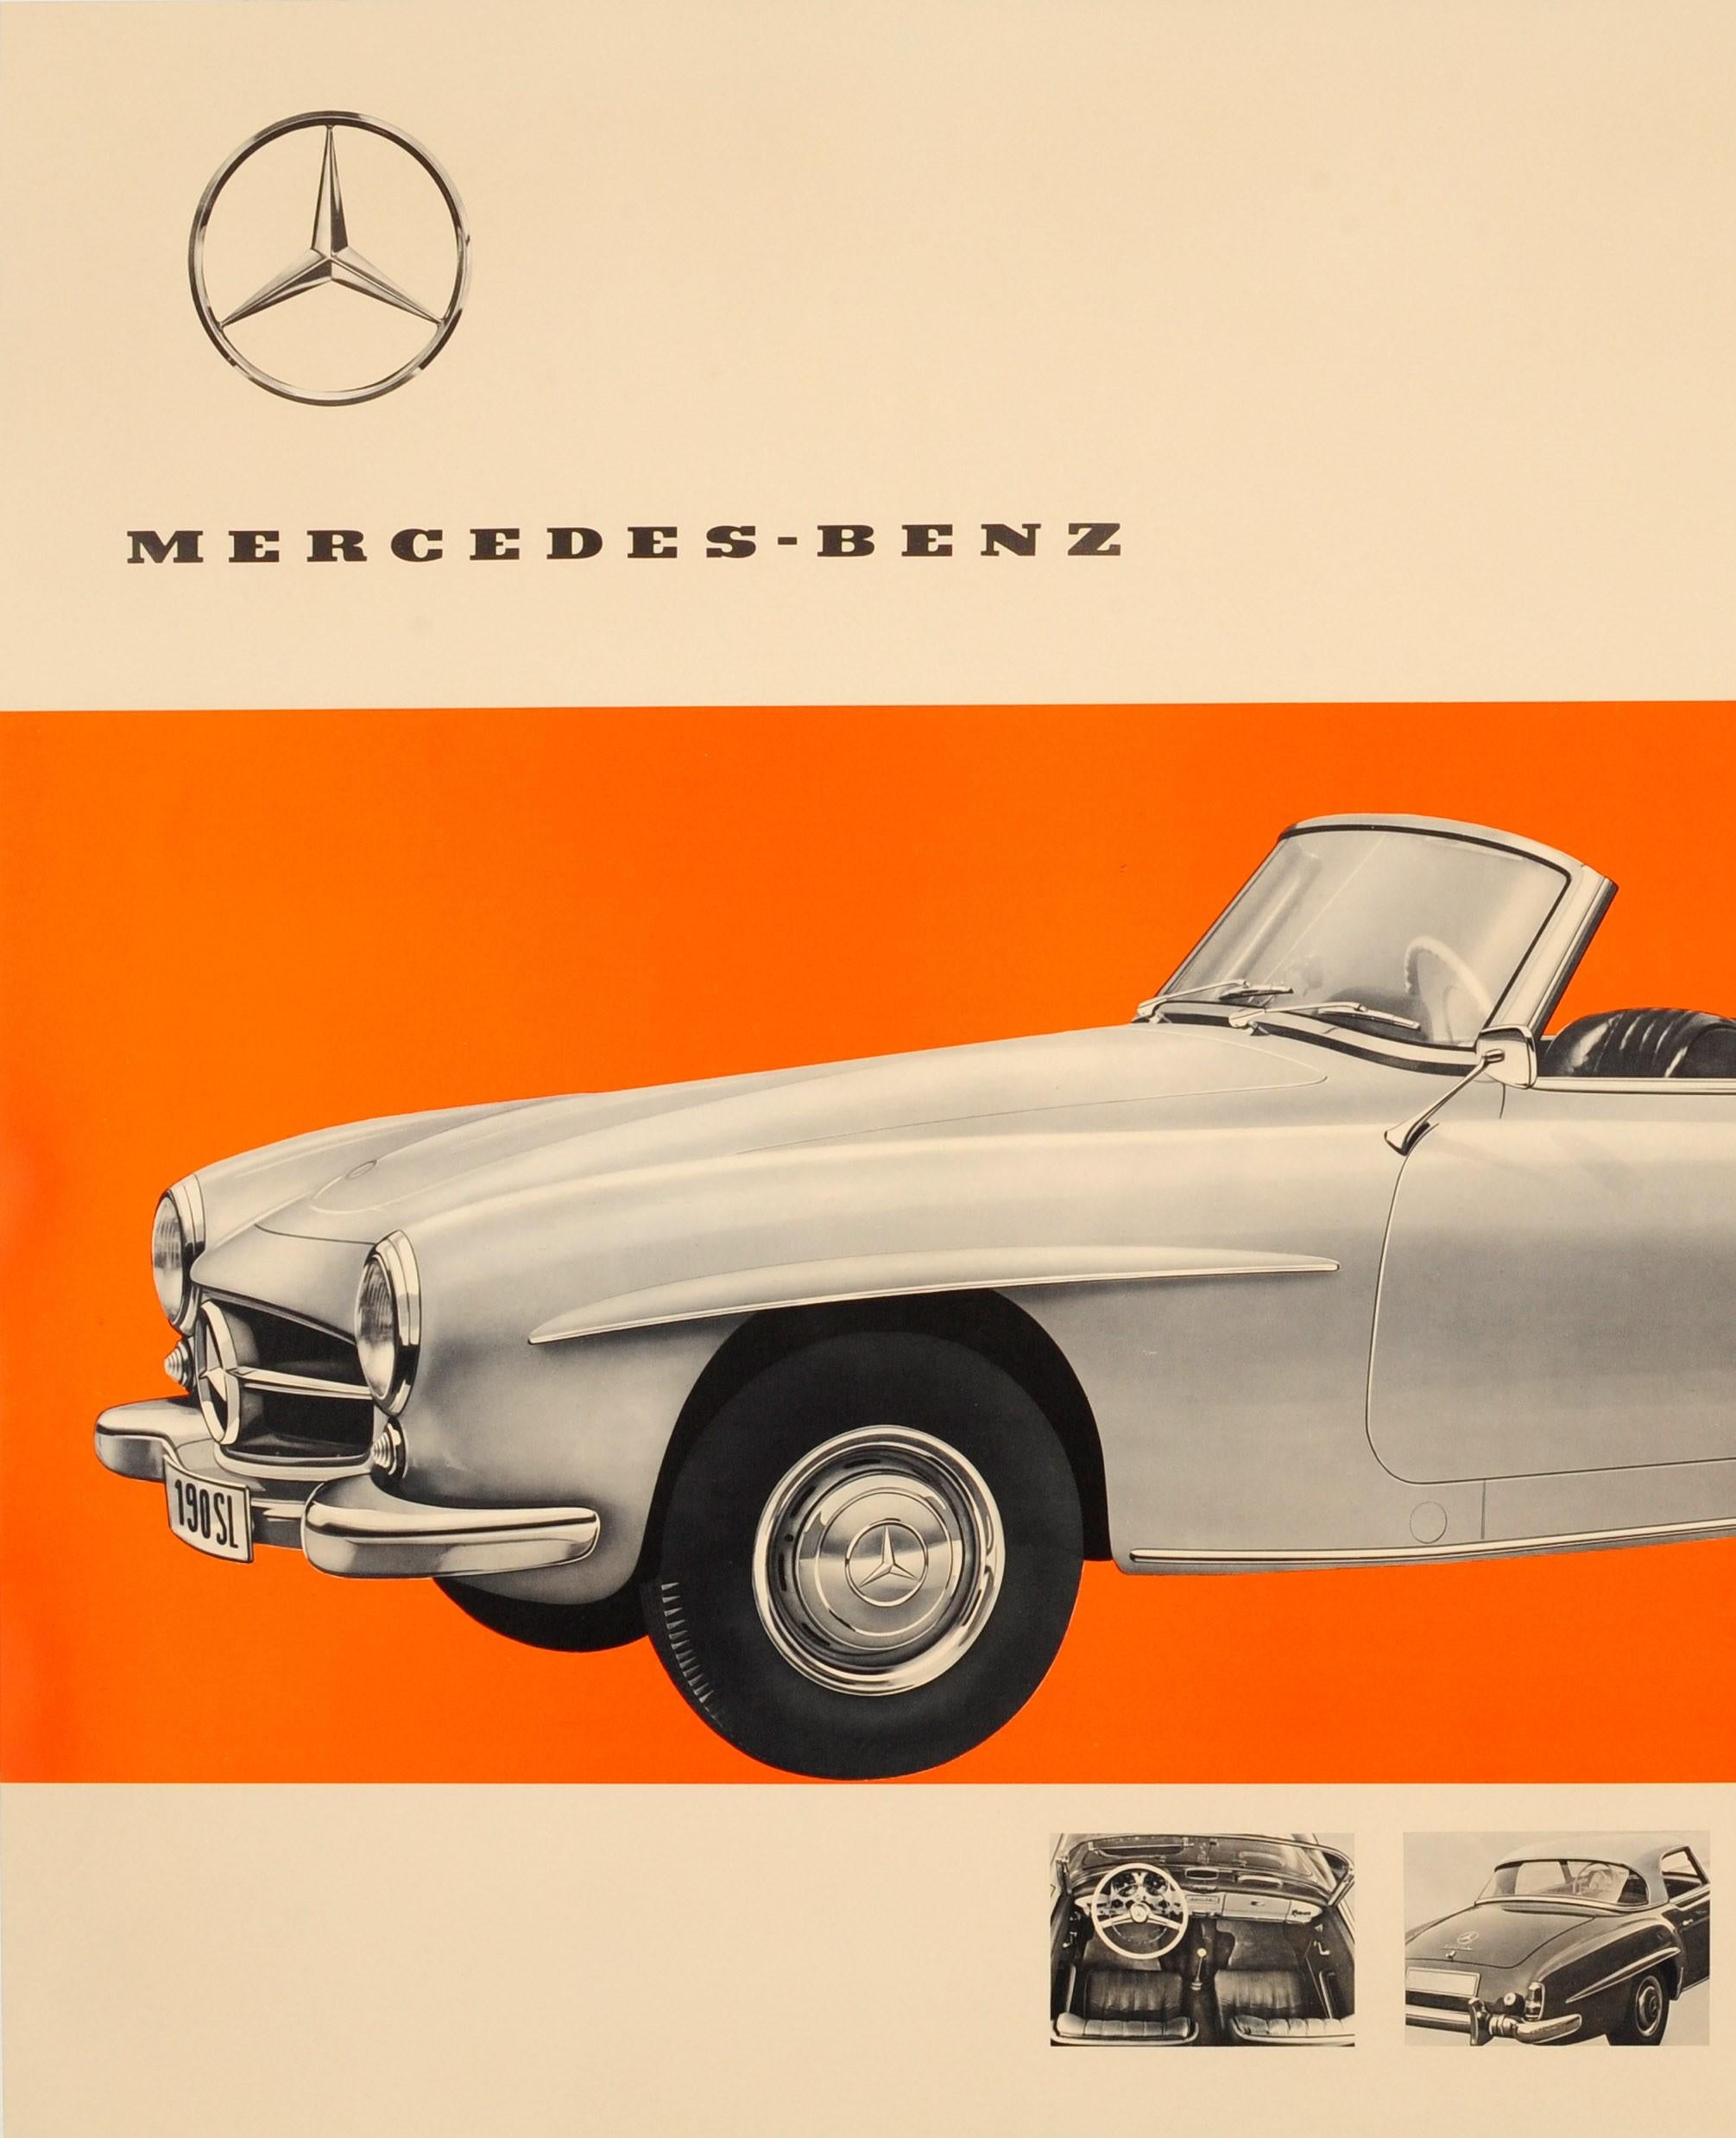 Original vintage car advertising poster for the German manufactured Mercedes Benz 190 SL (1995-1963) featuring a black and white photo of the stylish two-door luxury roadster against a colorful stripe with more images below showing the interior of